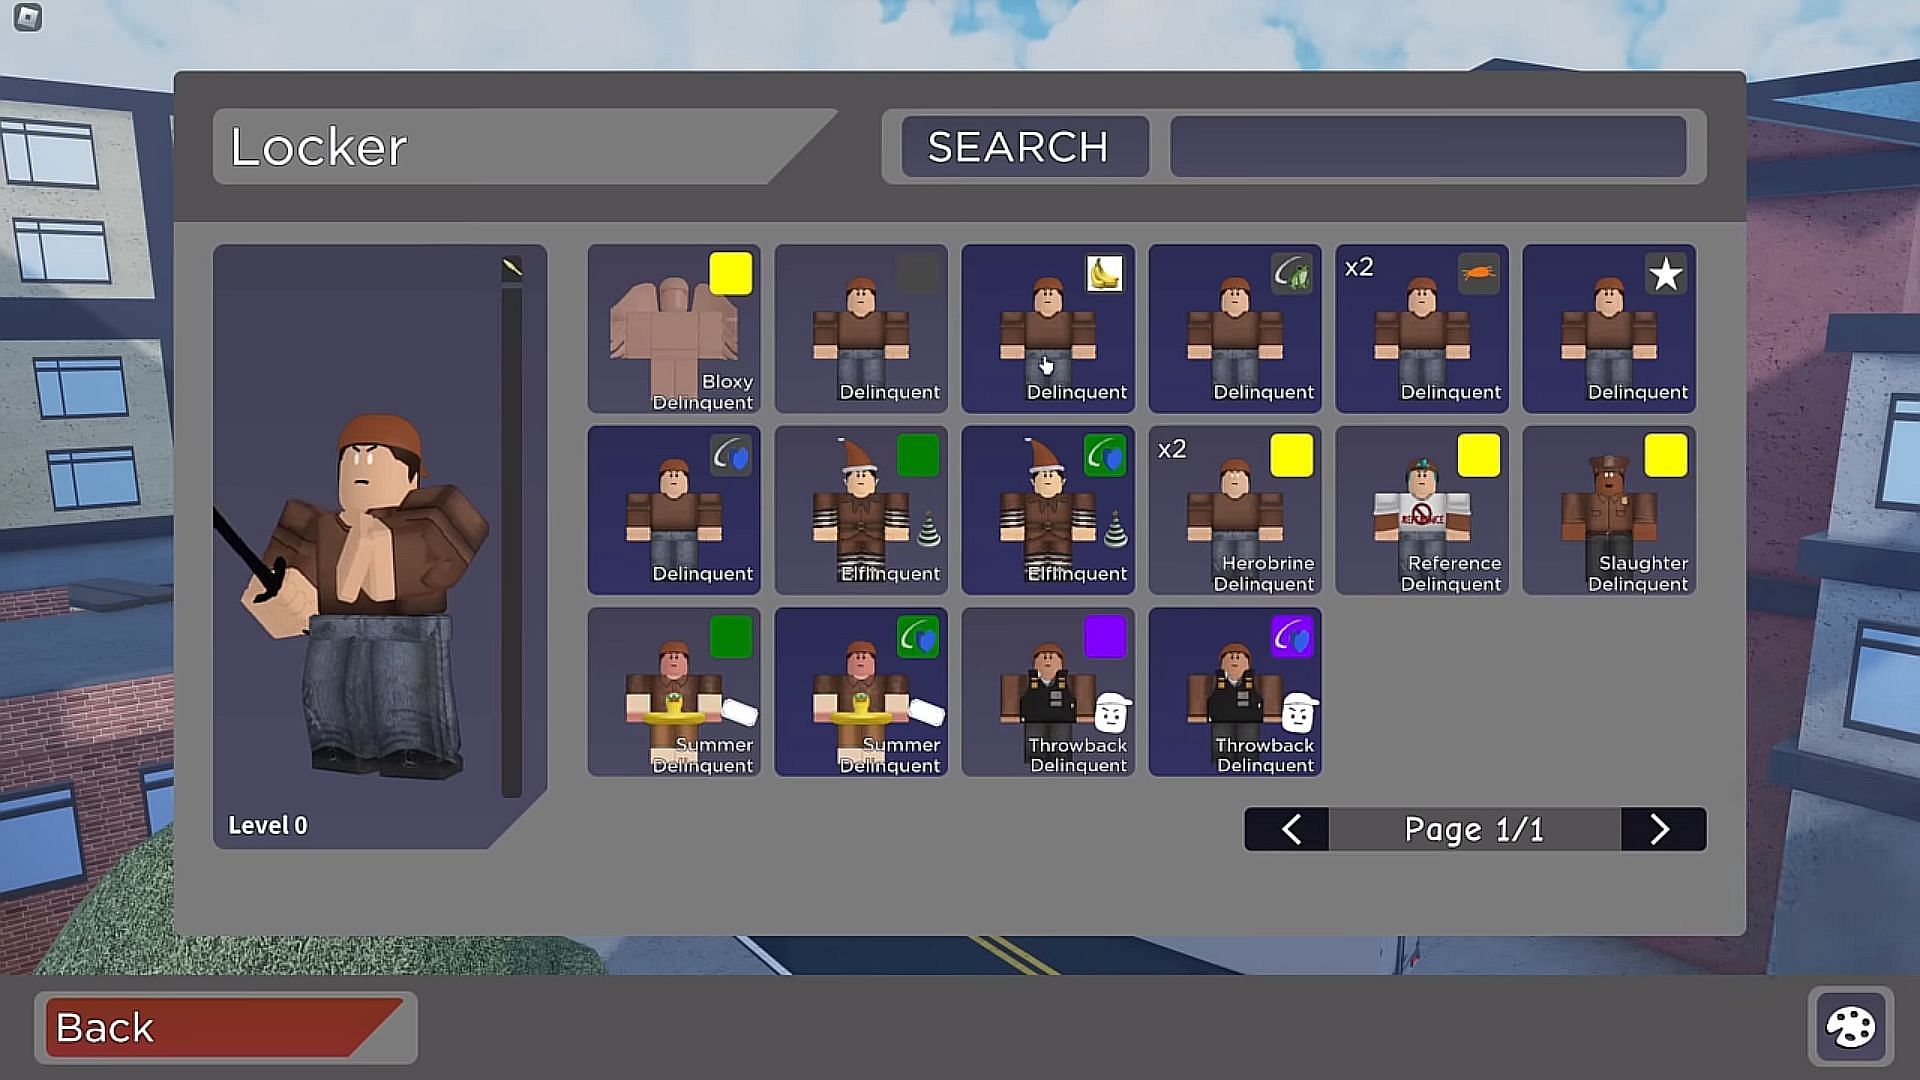 Featured image of the locker interface (Image via Conor3D)